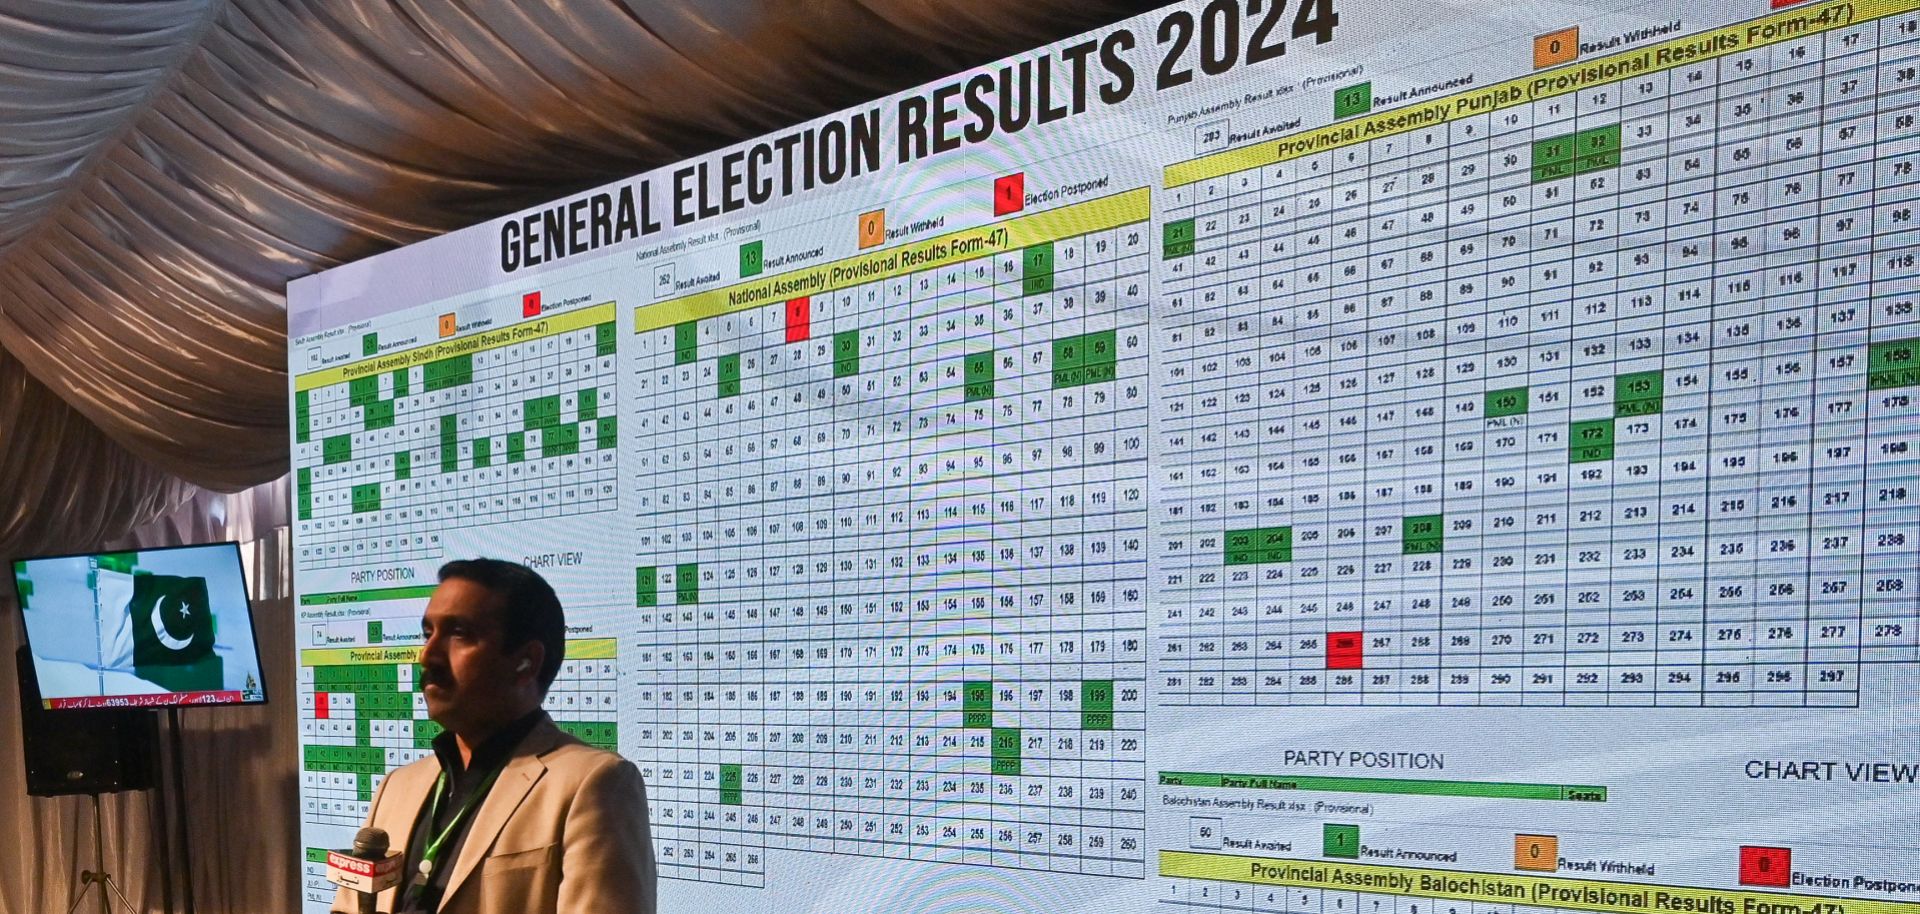 A journalist stands in front of a screen displaying live election results during a televised broadcast in Islamabad, Pakistan, on Feb. 9, 2024, a day after national elections were held in the country.